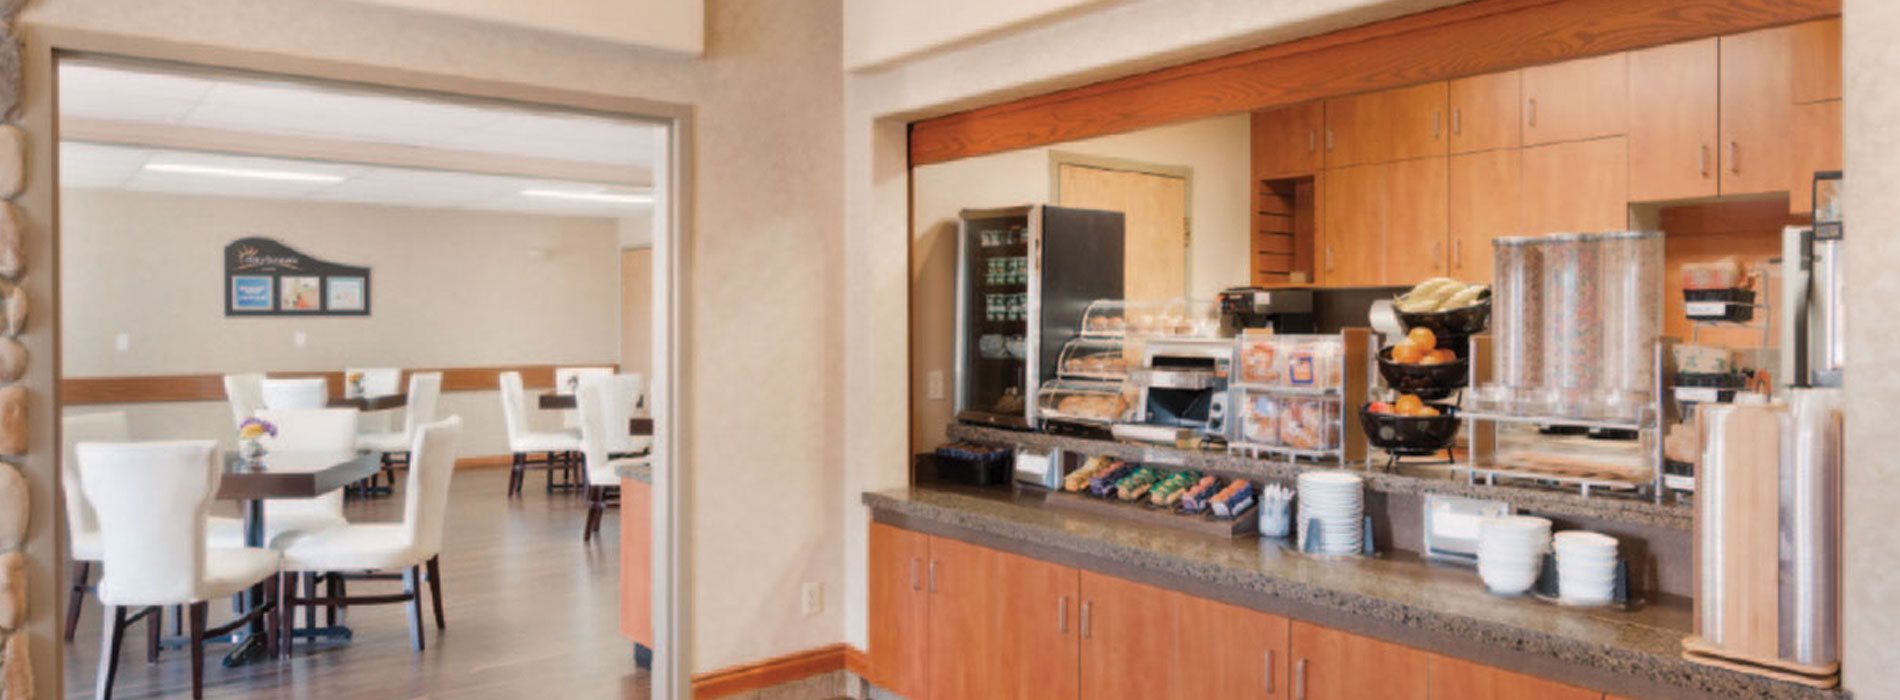 The Daybreak Café at Days Inn Red Deer showcases a long granite top counter with red ochre brown cabinetry.  Bowls of fruit, a mini refrigerator unit, stainless steel toaster, baked goods housed in display cases, and dining ware all sit atop the breakfast bar, which overlooks the entrance to the eating space populated by square tables and white upholstered Parsons chairs.